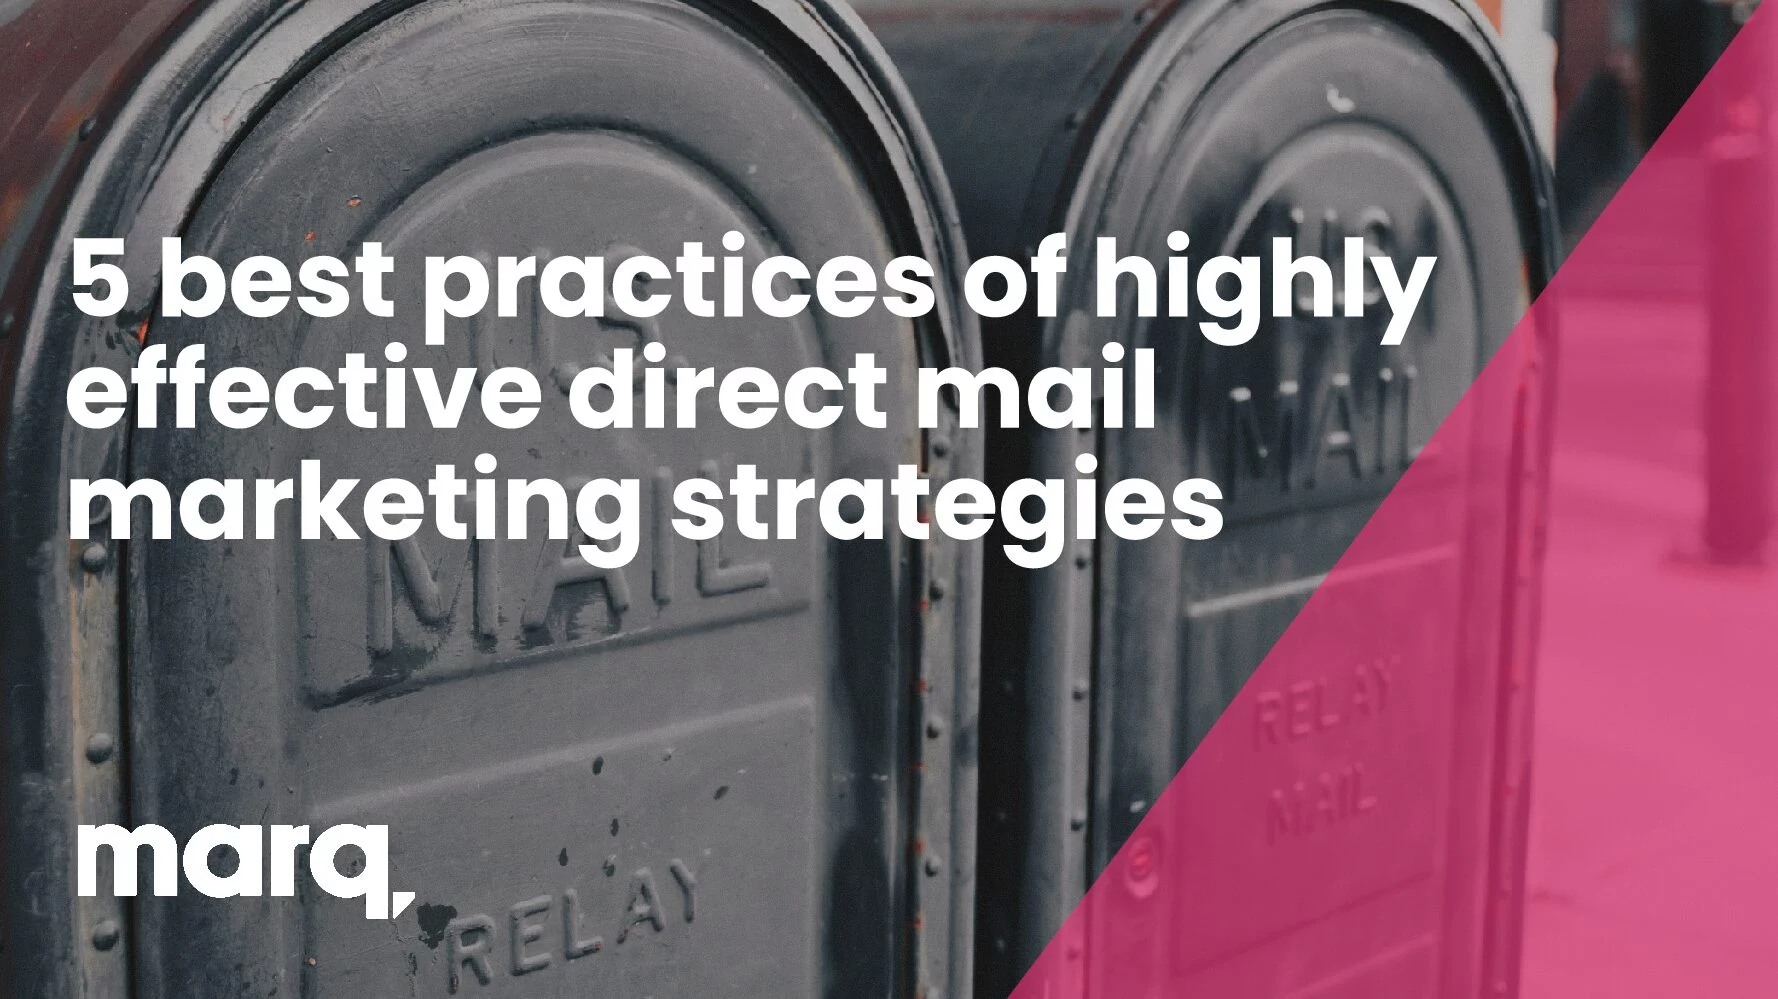 5 best practices of highly effective direct mail marketing strategies